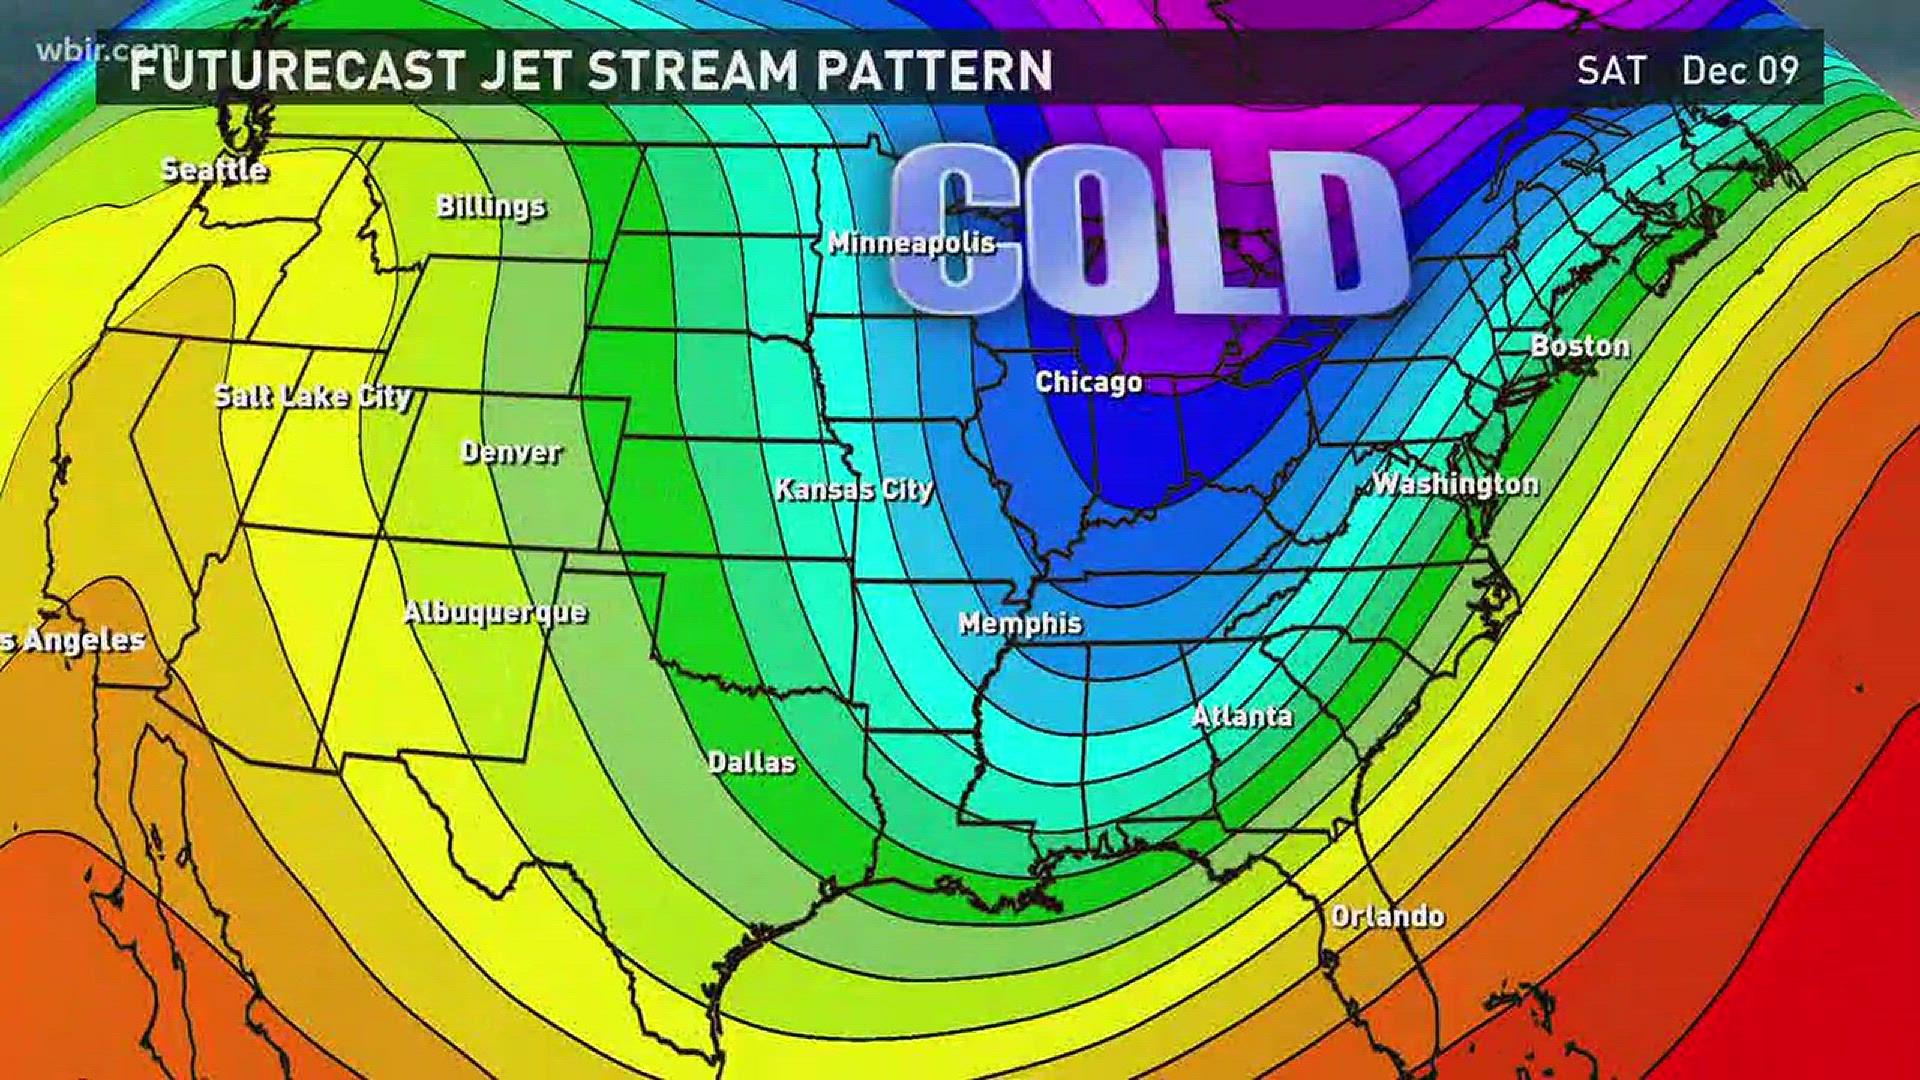 Could the polar vortex cause the cold weather coming our way later this week?